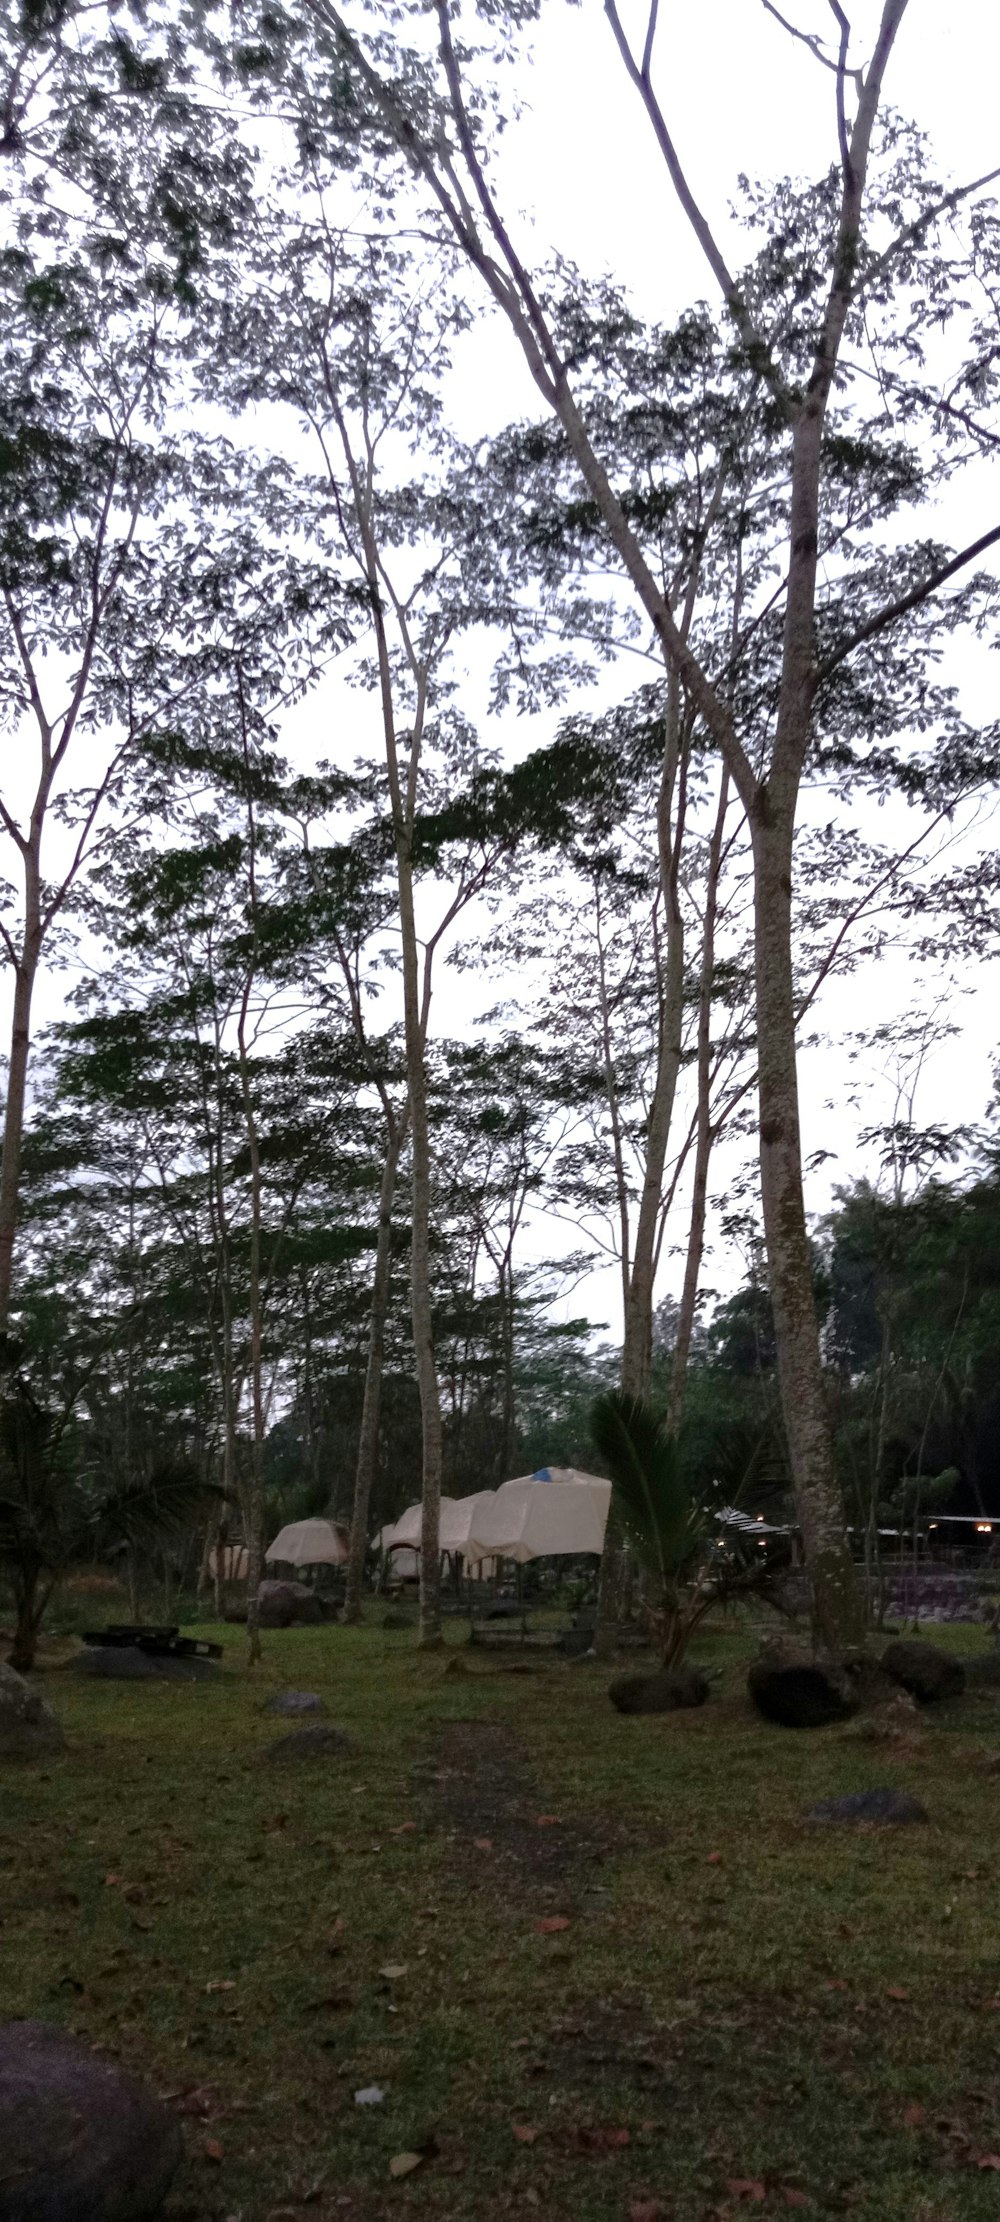 a group of tents sitting in the middle of a forest